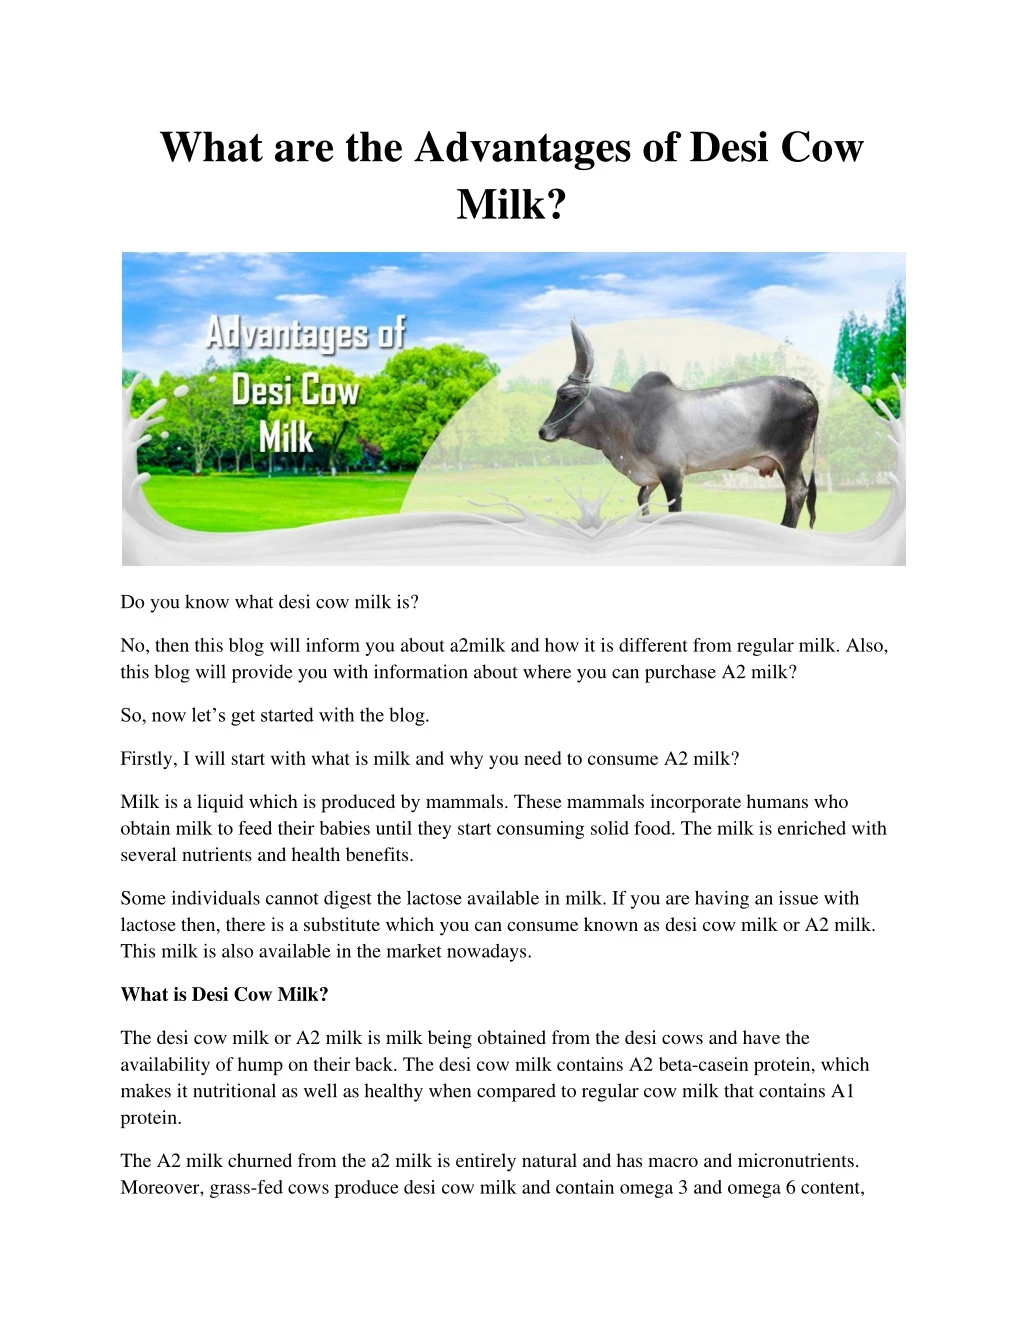 what are the advantages of desi cow milk